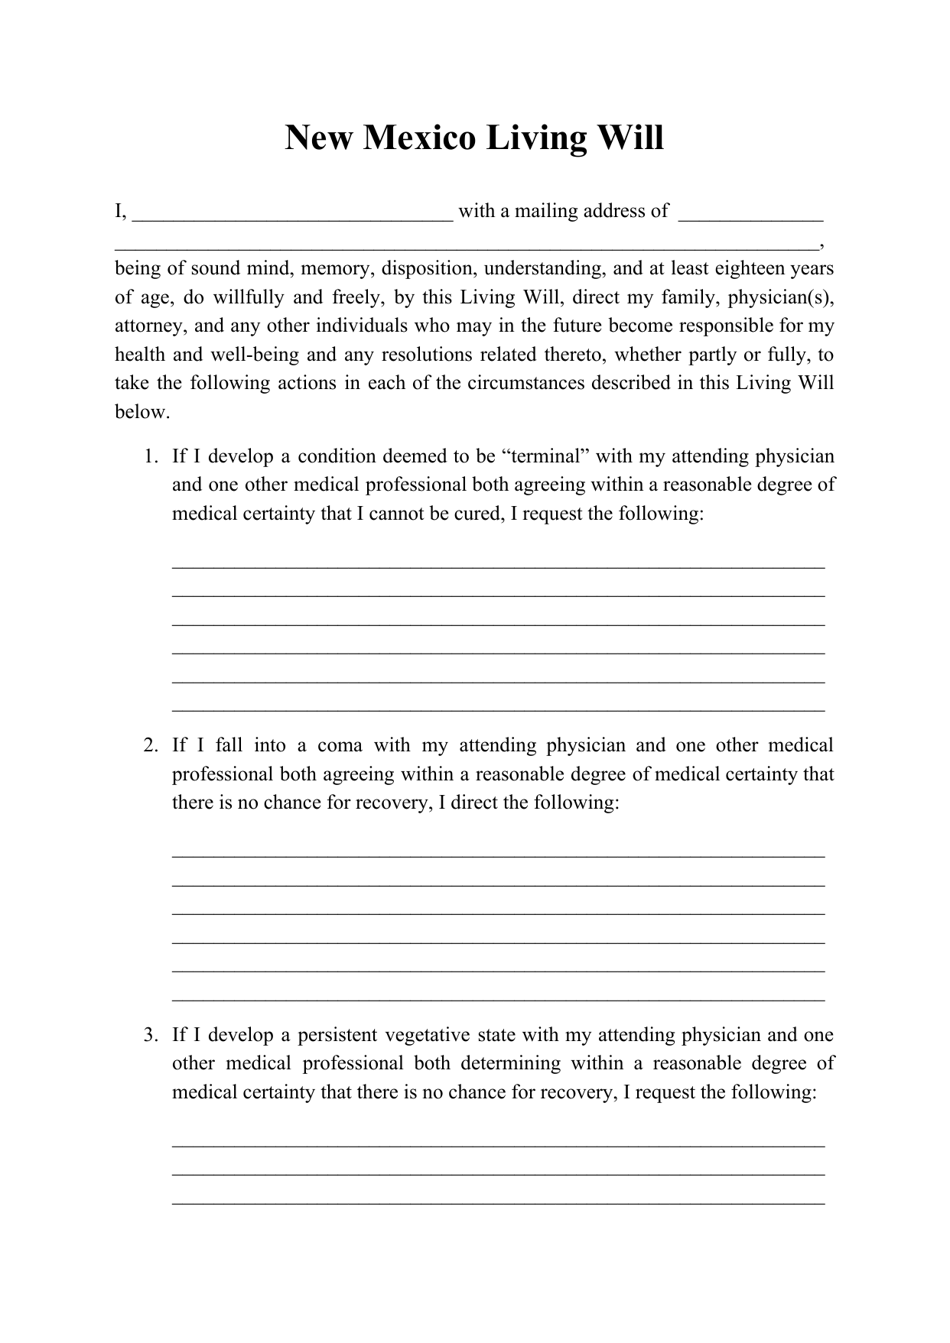 new-mexico-living-will-form-fill-out-sign-online-and-download-pdf